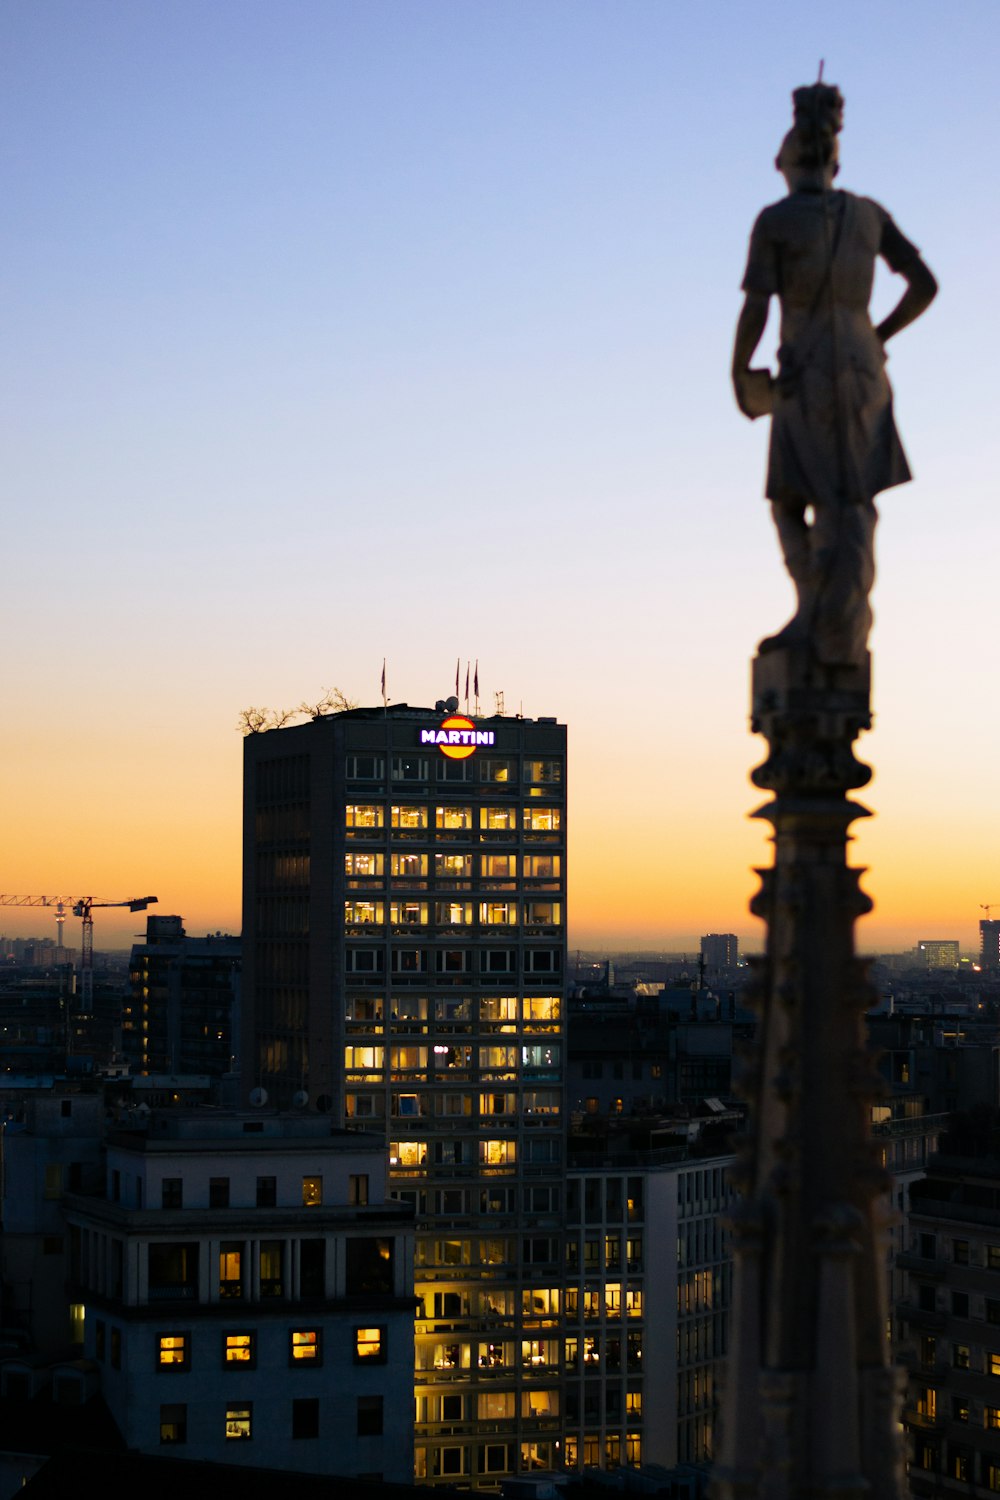 a statue of a man standing on top of a tall building